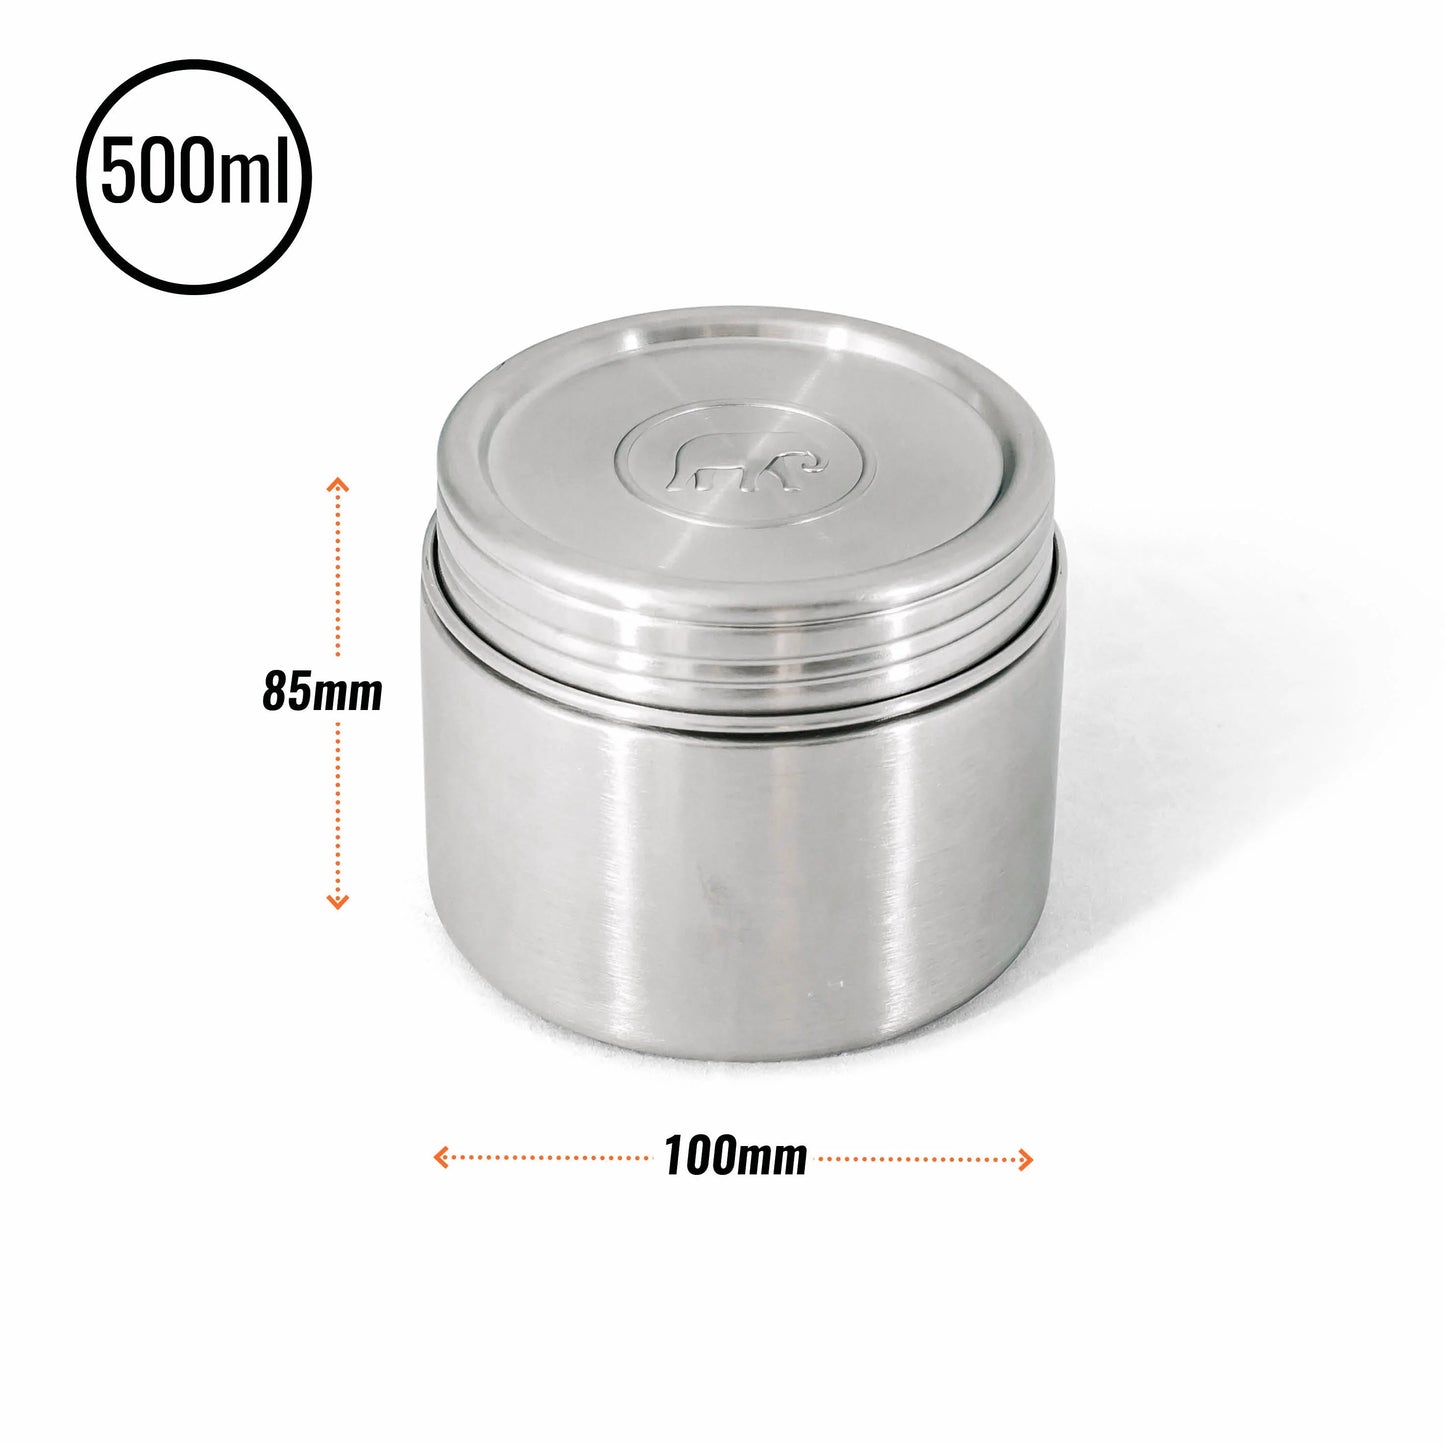 Elephant Box Stainless Steel Leakproof Twist & Lock Food Canister 500ml